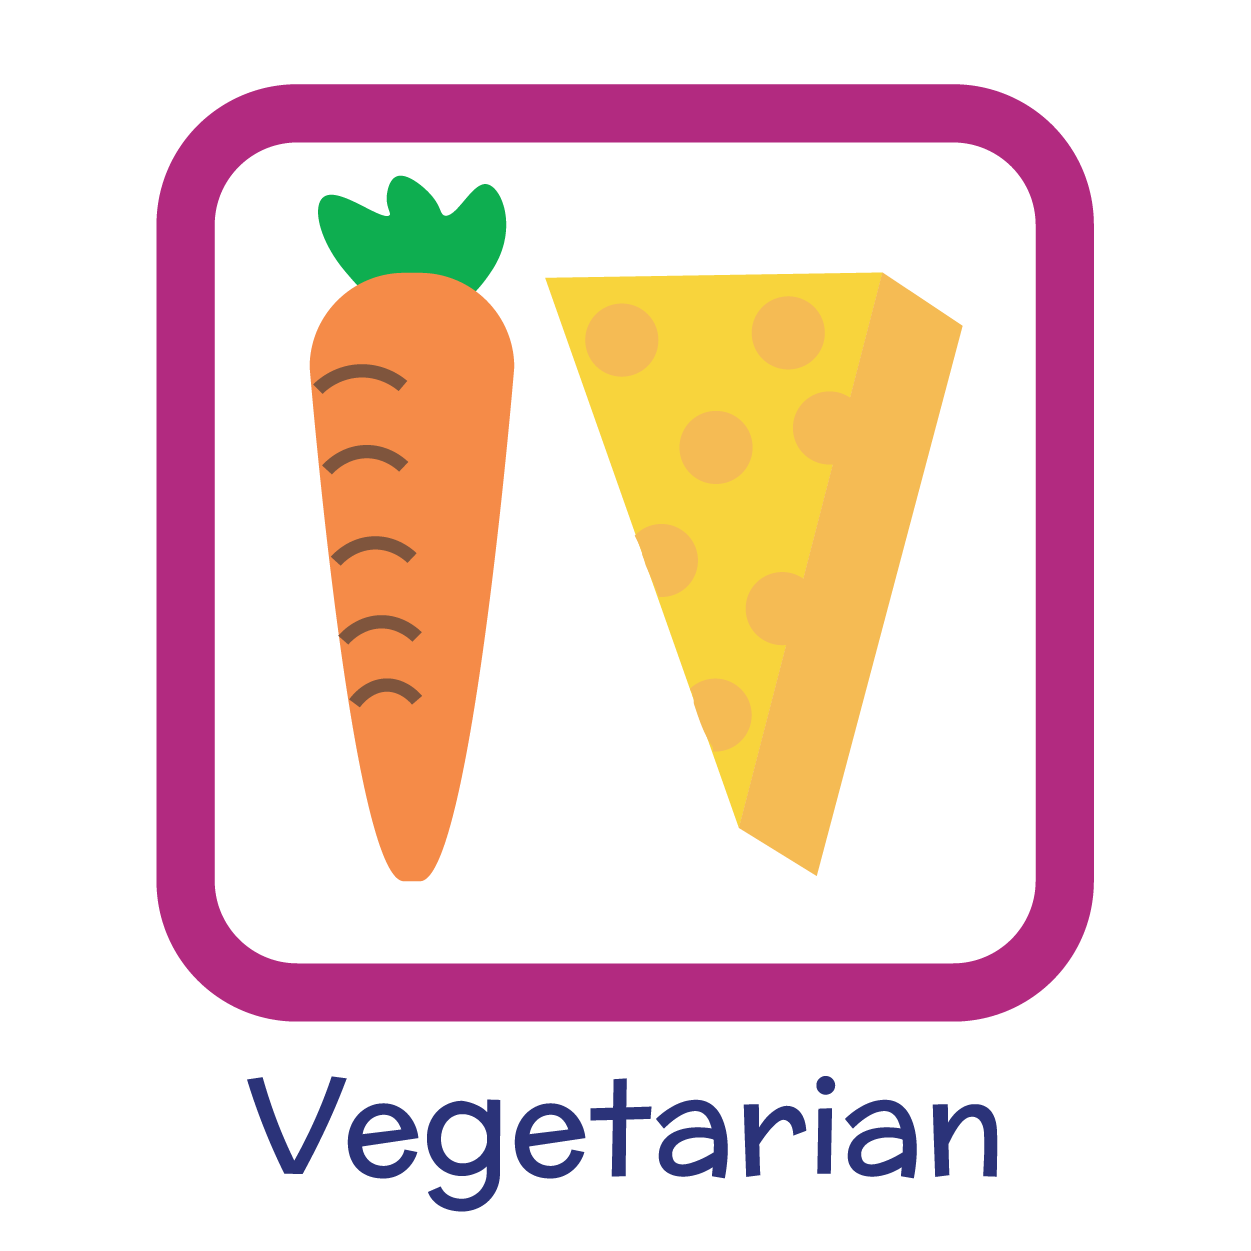 vegetarian-icon-nomster-chef-08-10.png